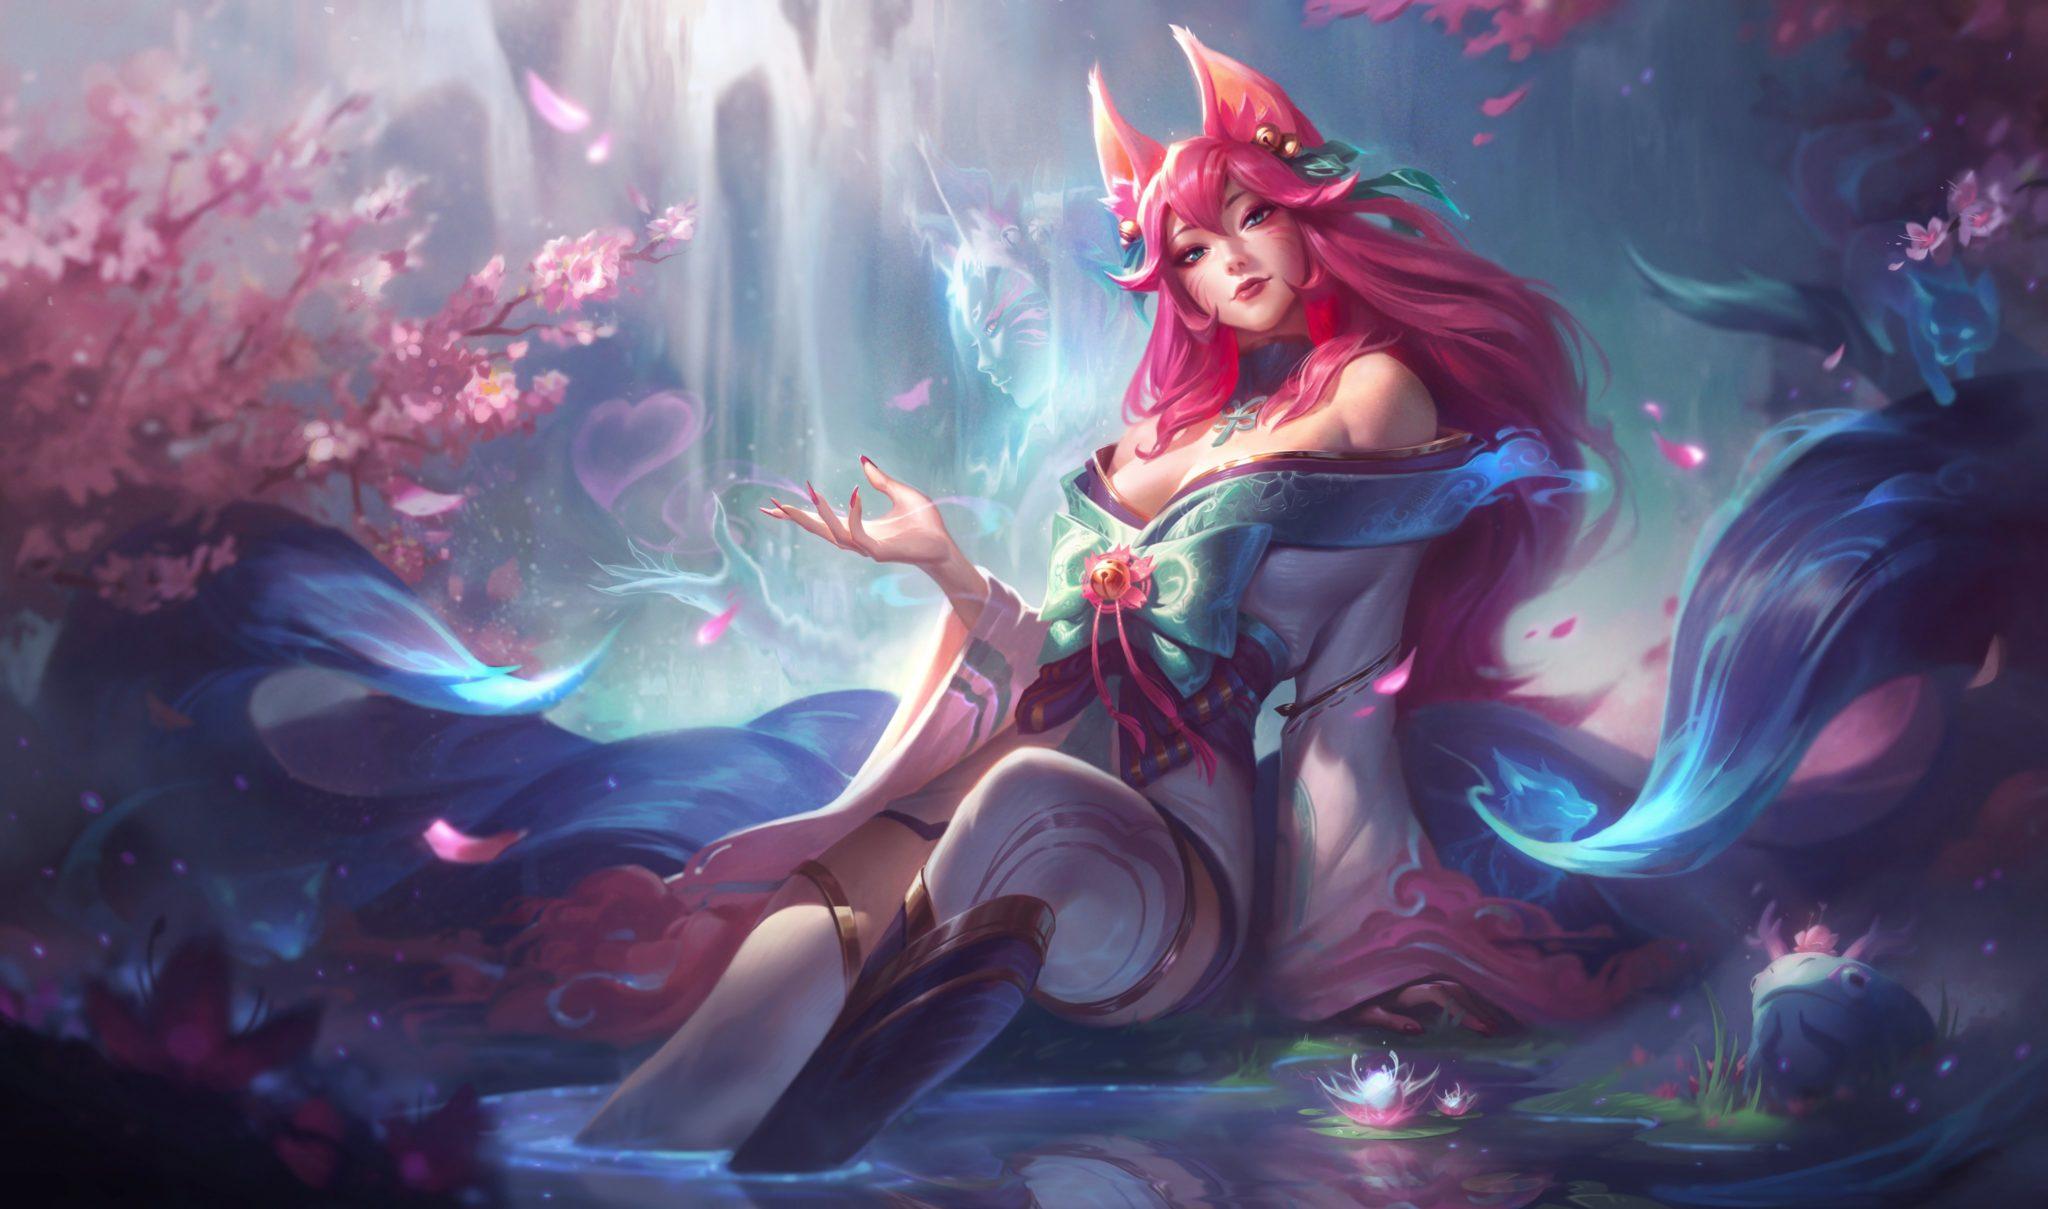 There's more than half a dozen new League skins being released in the Spirit Blossom event.